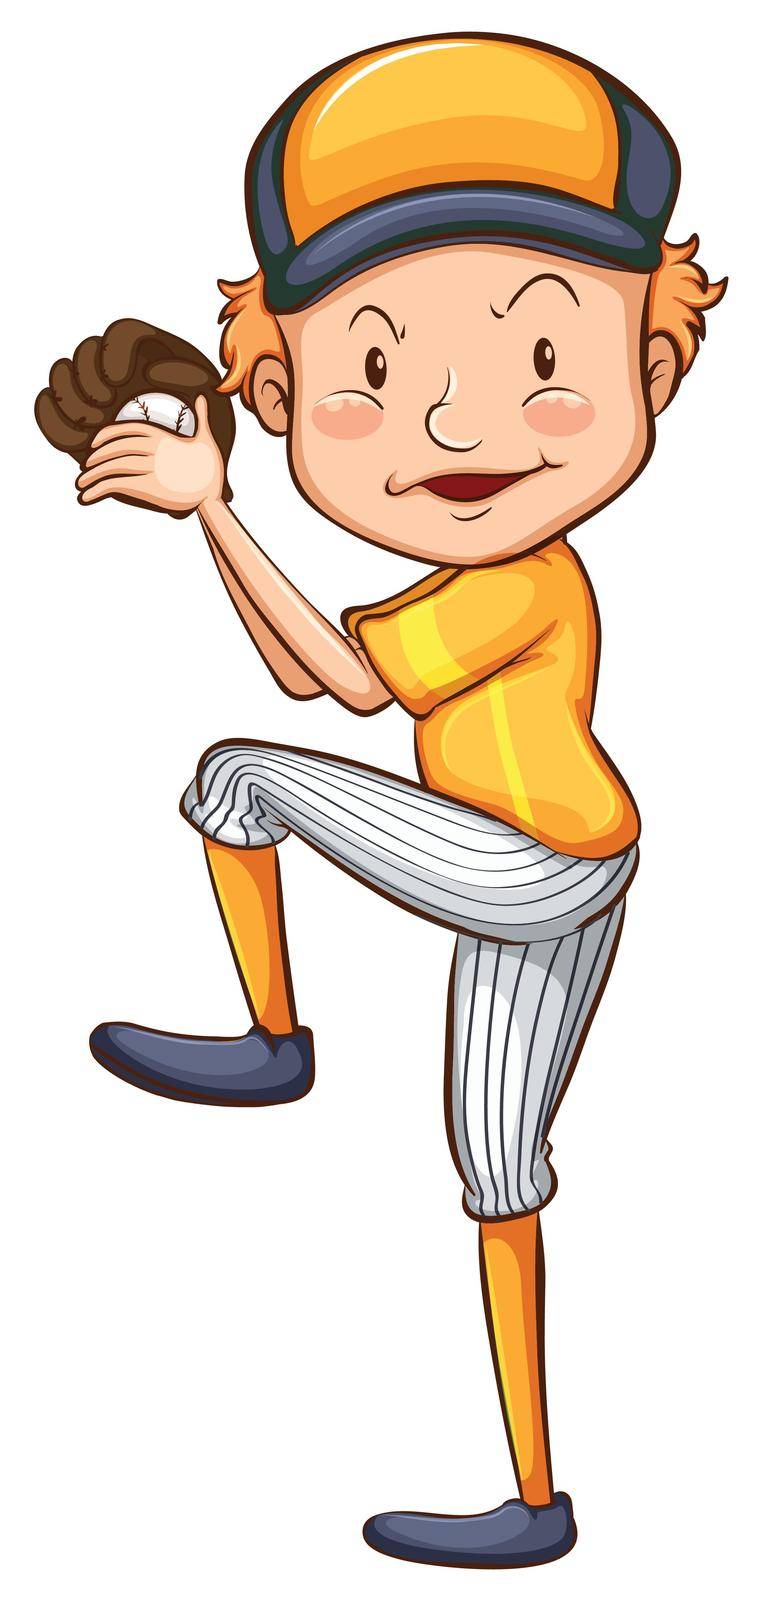 A simple drawing of a baseball player on a white background